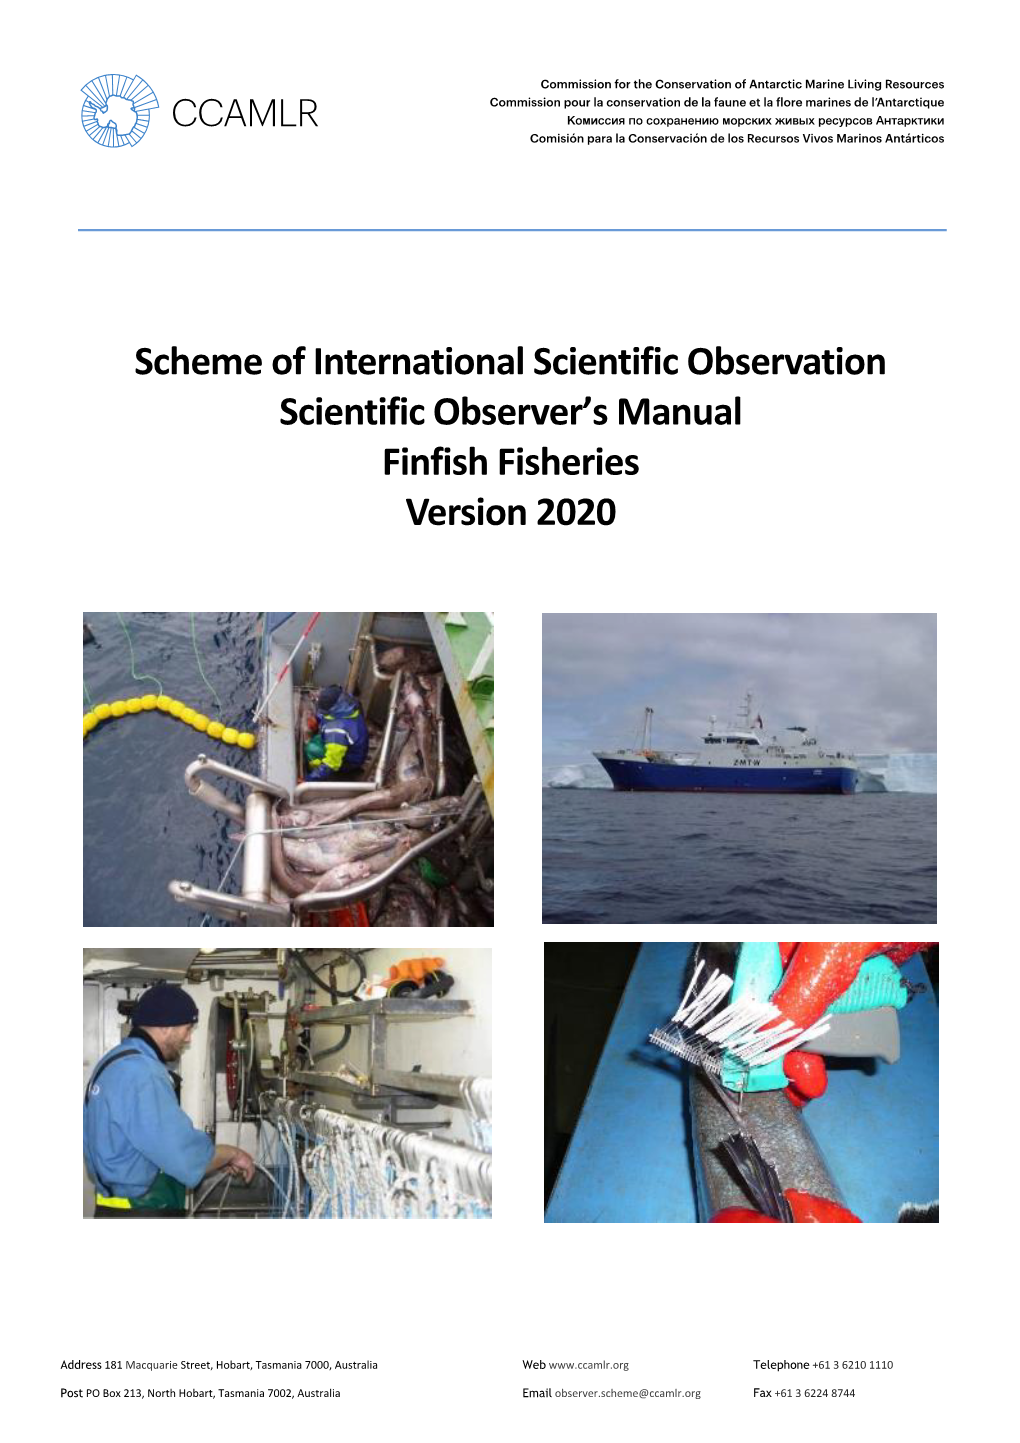 Downloaded from the CCAMLR Website at the CCAMLR Scheme of International Scientific Observation Webpage (